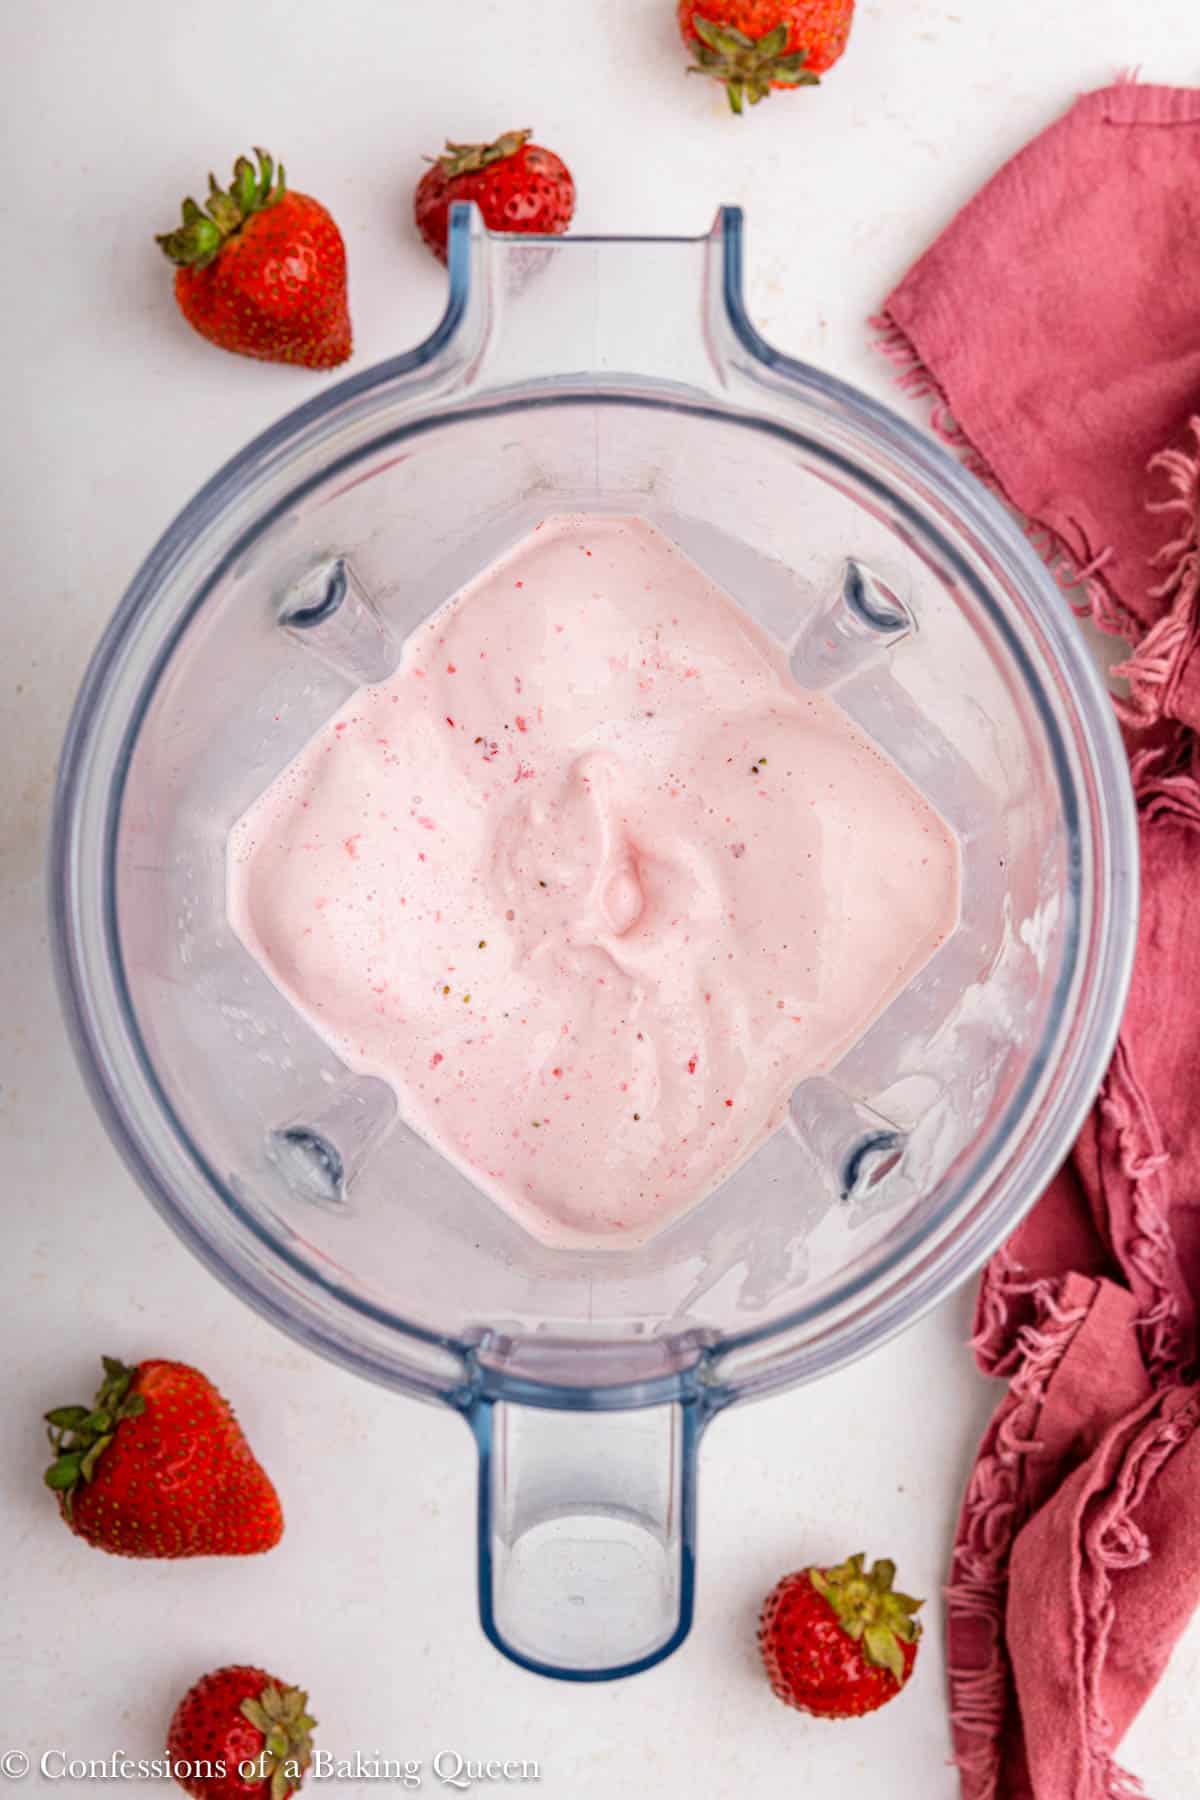 strawberry milkshake in a vitamix blender on a light surface with a pink linen and strawberries